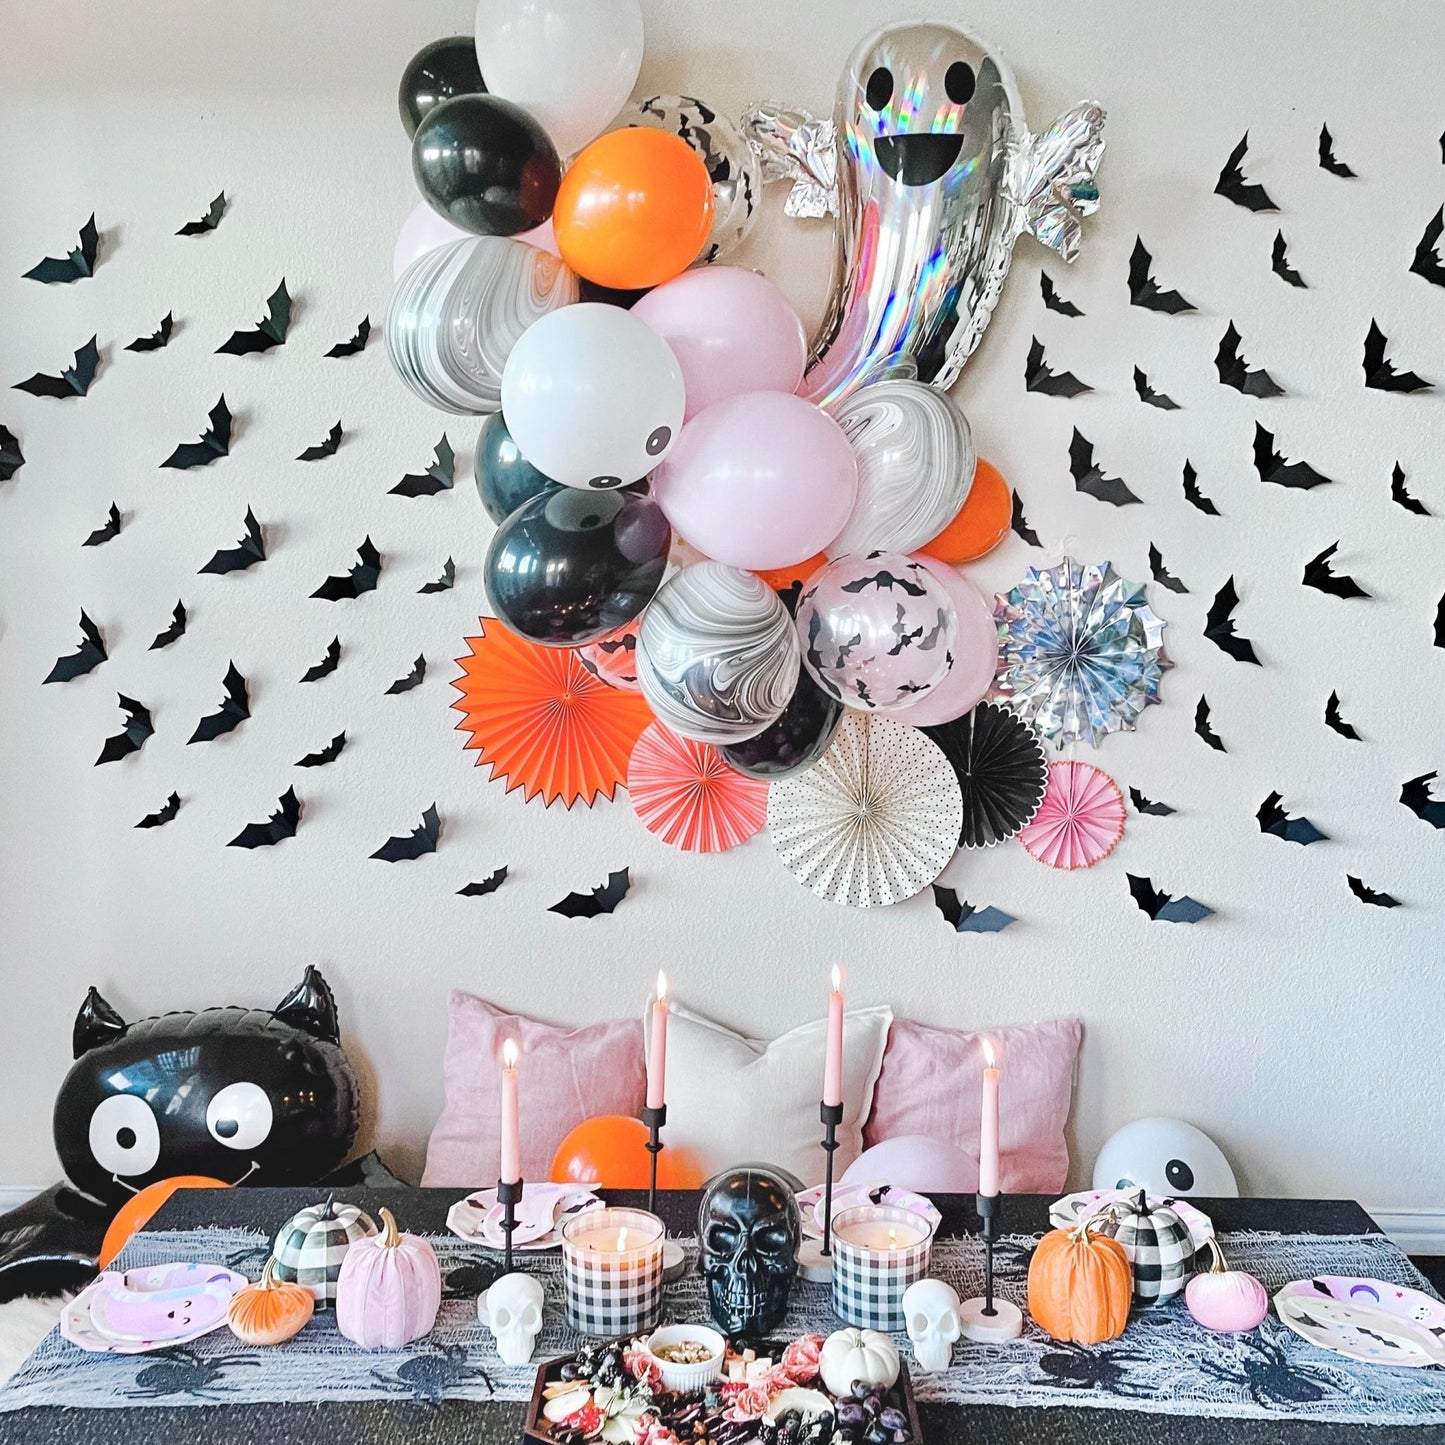 Giant Cute Black Bat Balloon (42 Inches) - Halloween Party Decoration - Ellie's Party Supply